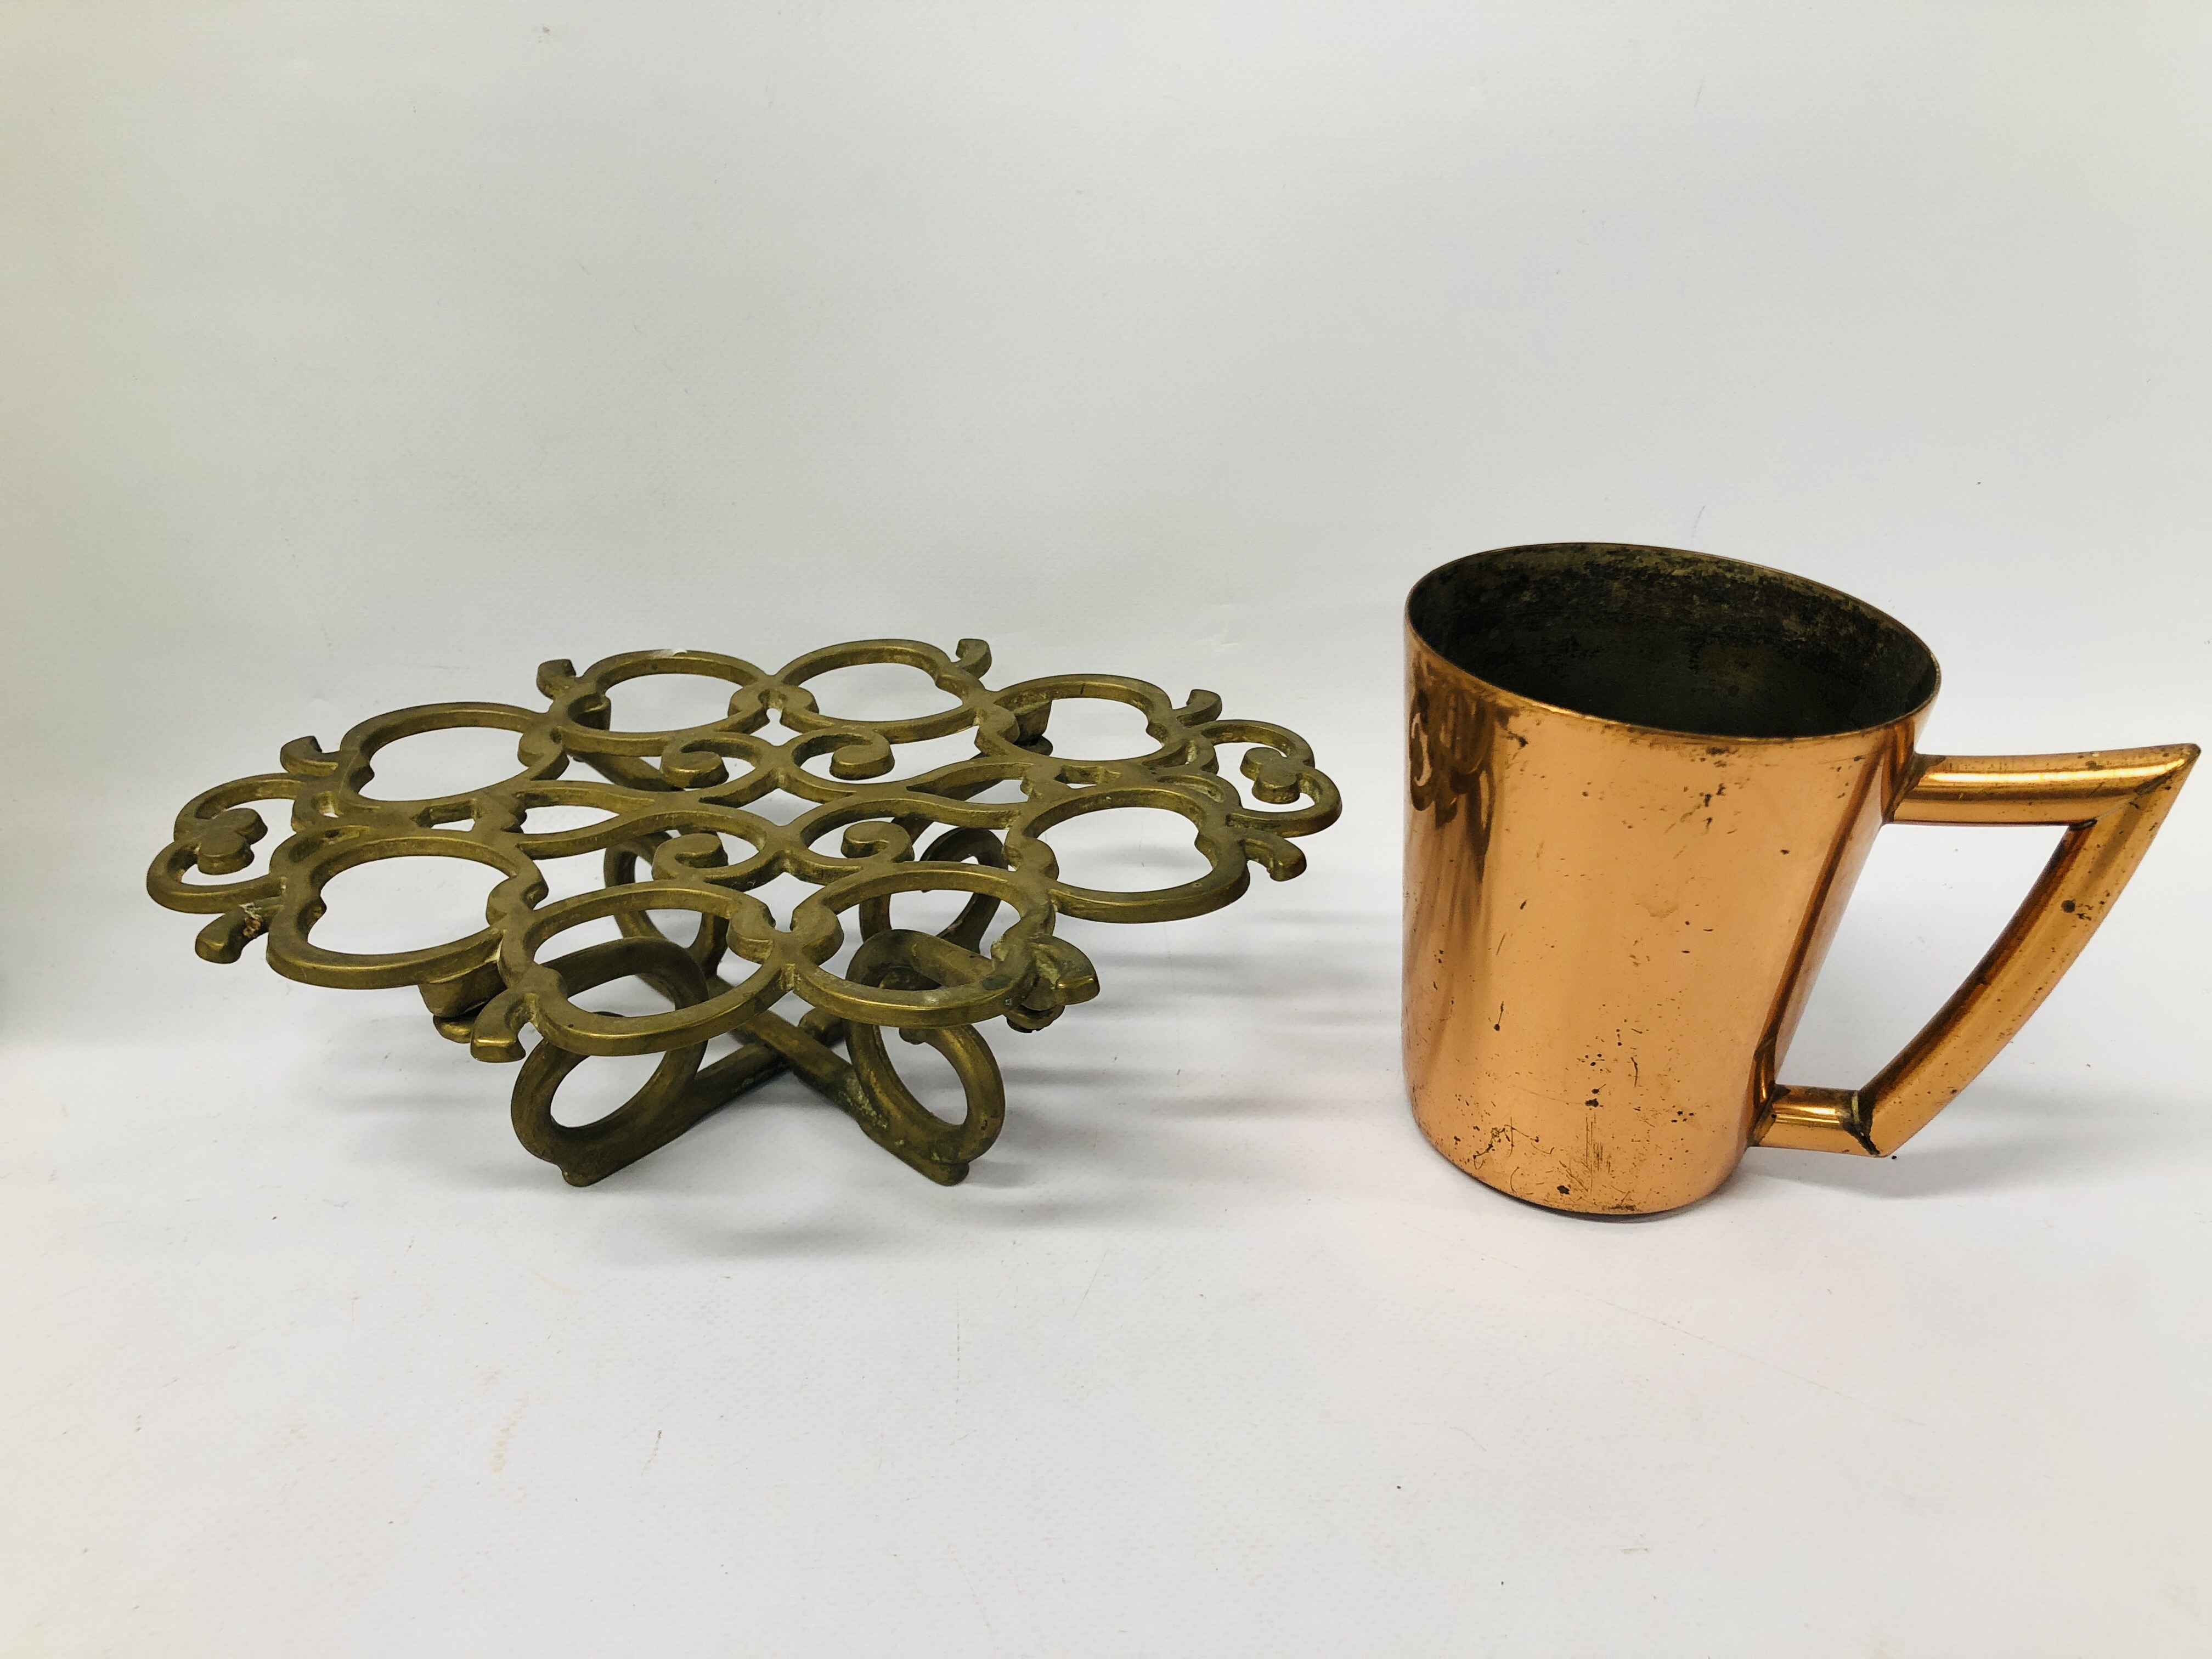 MIXED BRASS AND COPPER TO INCLUDE OIL LAMPS, LAMPS, STOVE, TRIVET, WATERING CAN, SCALES, CUPS, - Image 18 of 27